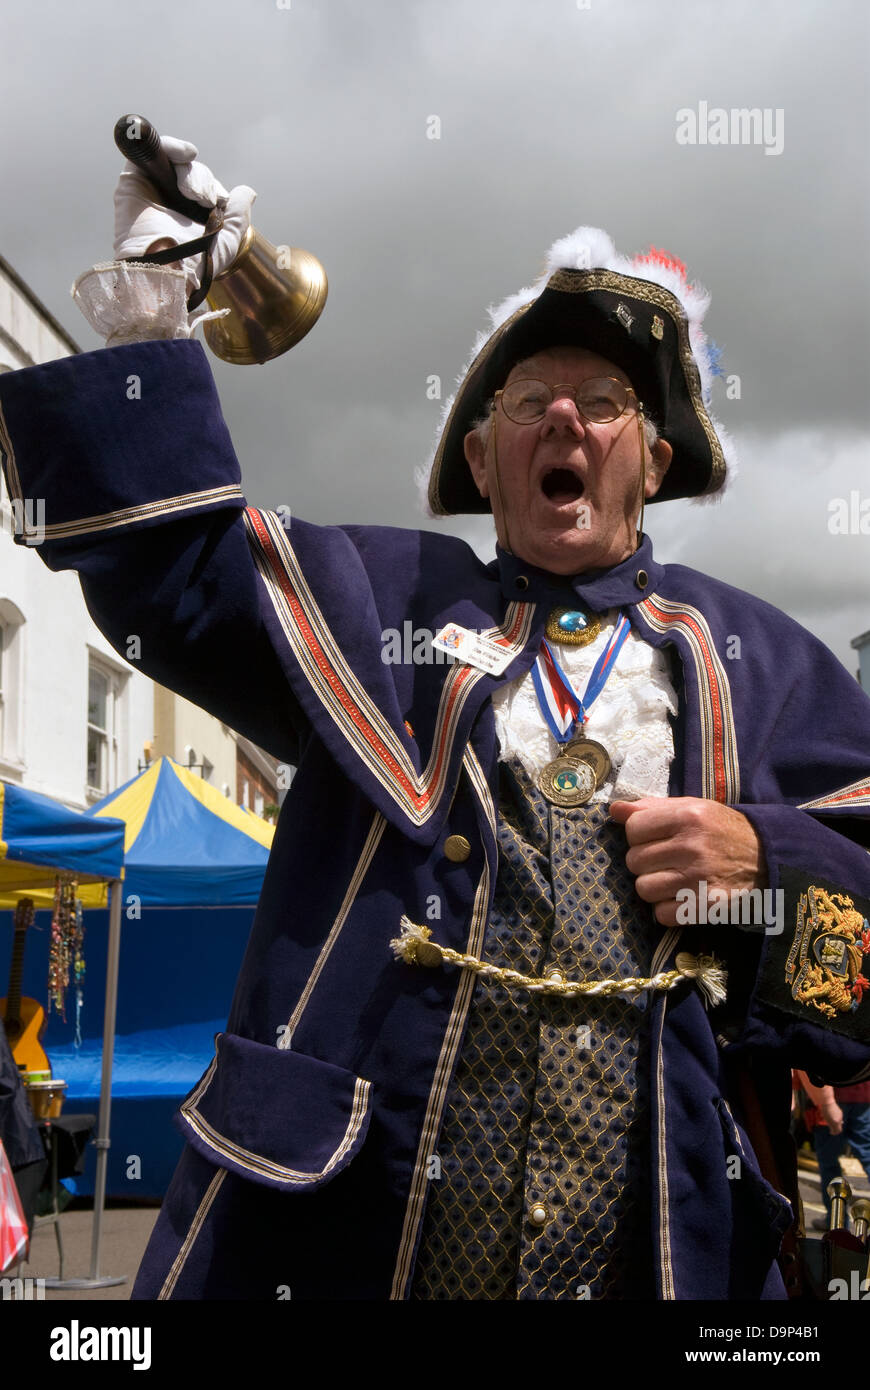 Alton Town Crier at work in High Street, Alton during the town's Regency Day and bicentenary celebrations, Alton, Hants, UK. Stock Photo